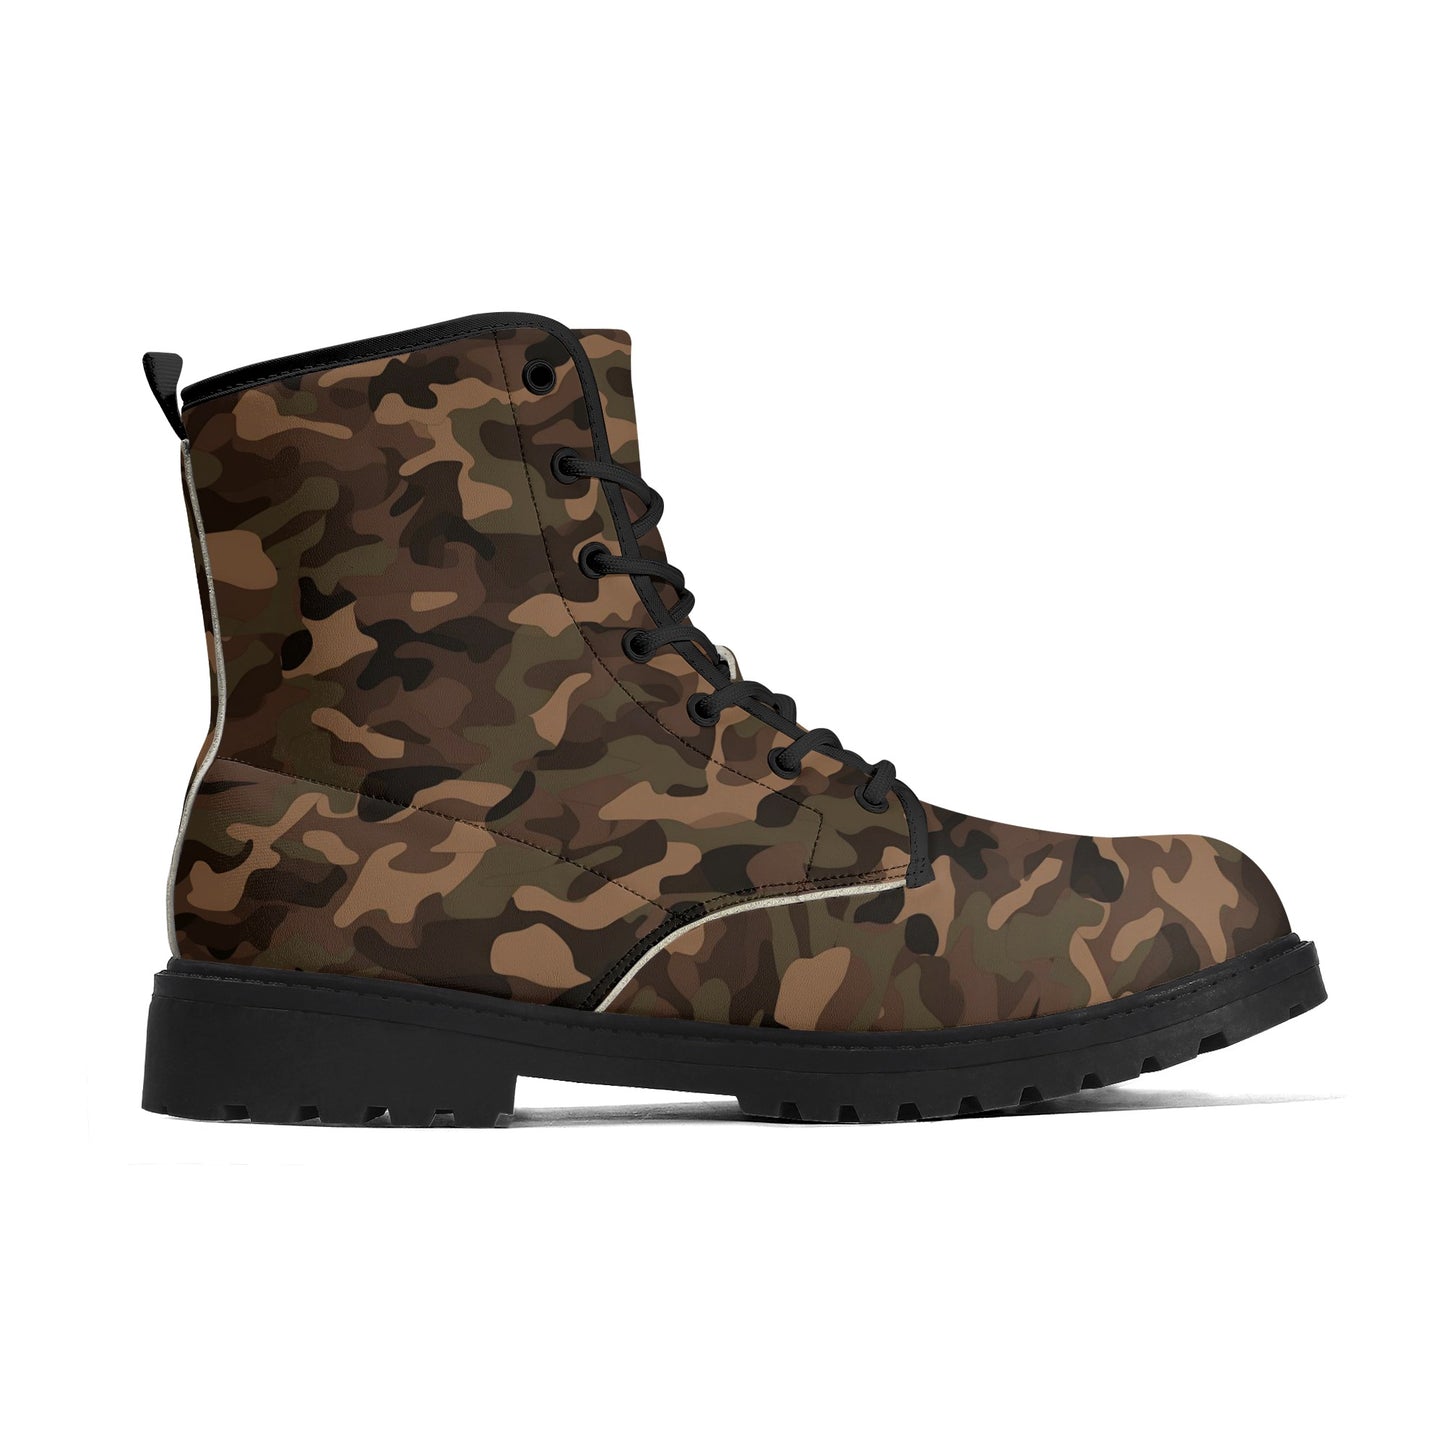 Brown Camo Women Leather Boots, Chocolate Camouflage Vegan Lace Up Shoes Hiking Festival Black Ankle Combat Work Winter Waterproof Ladies